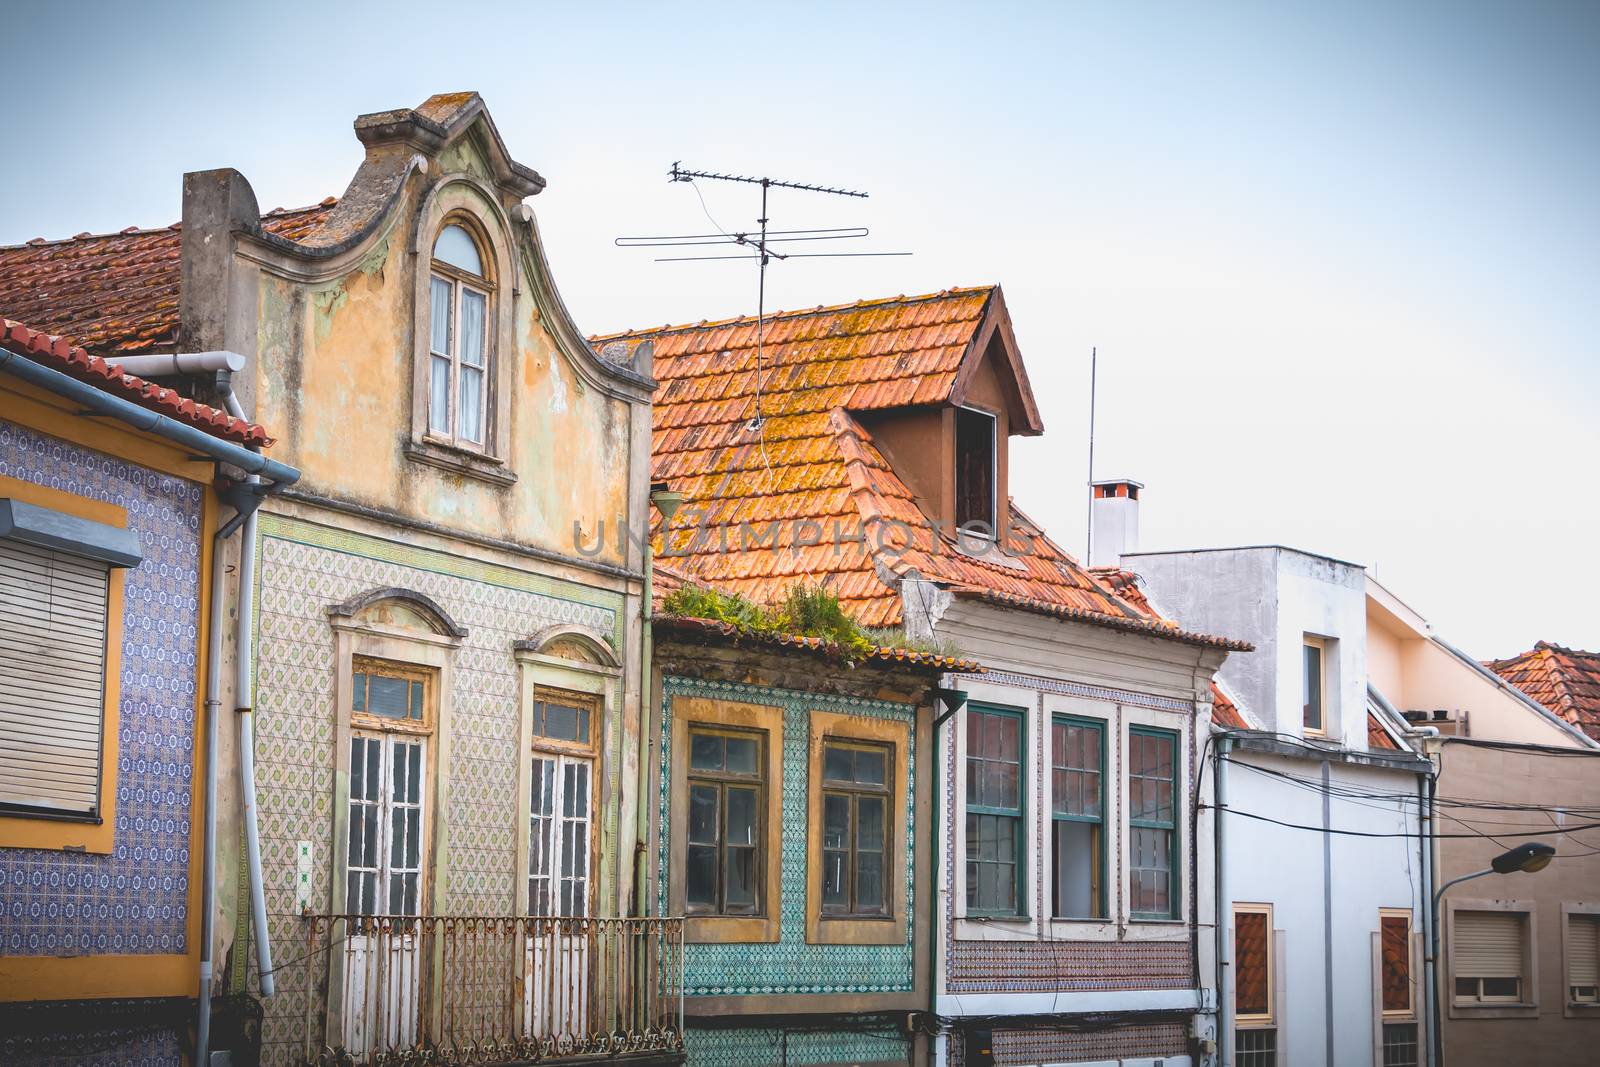 Small traditional house architecture detail in Aveiro by AtlanticEUROSTOXX